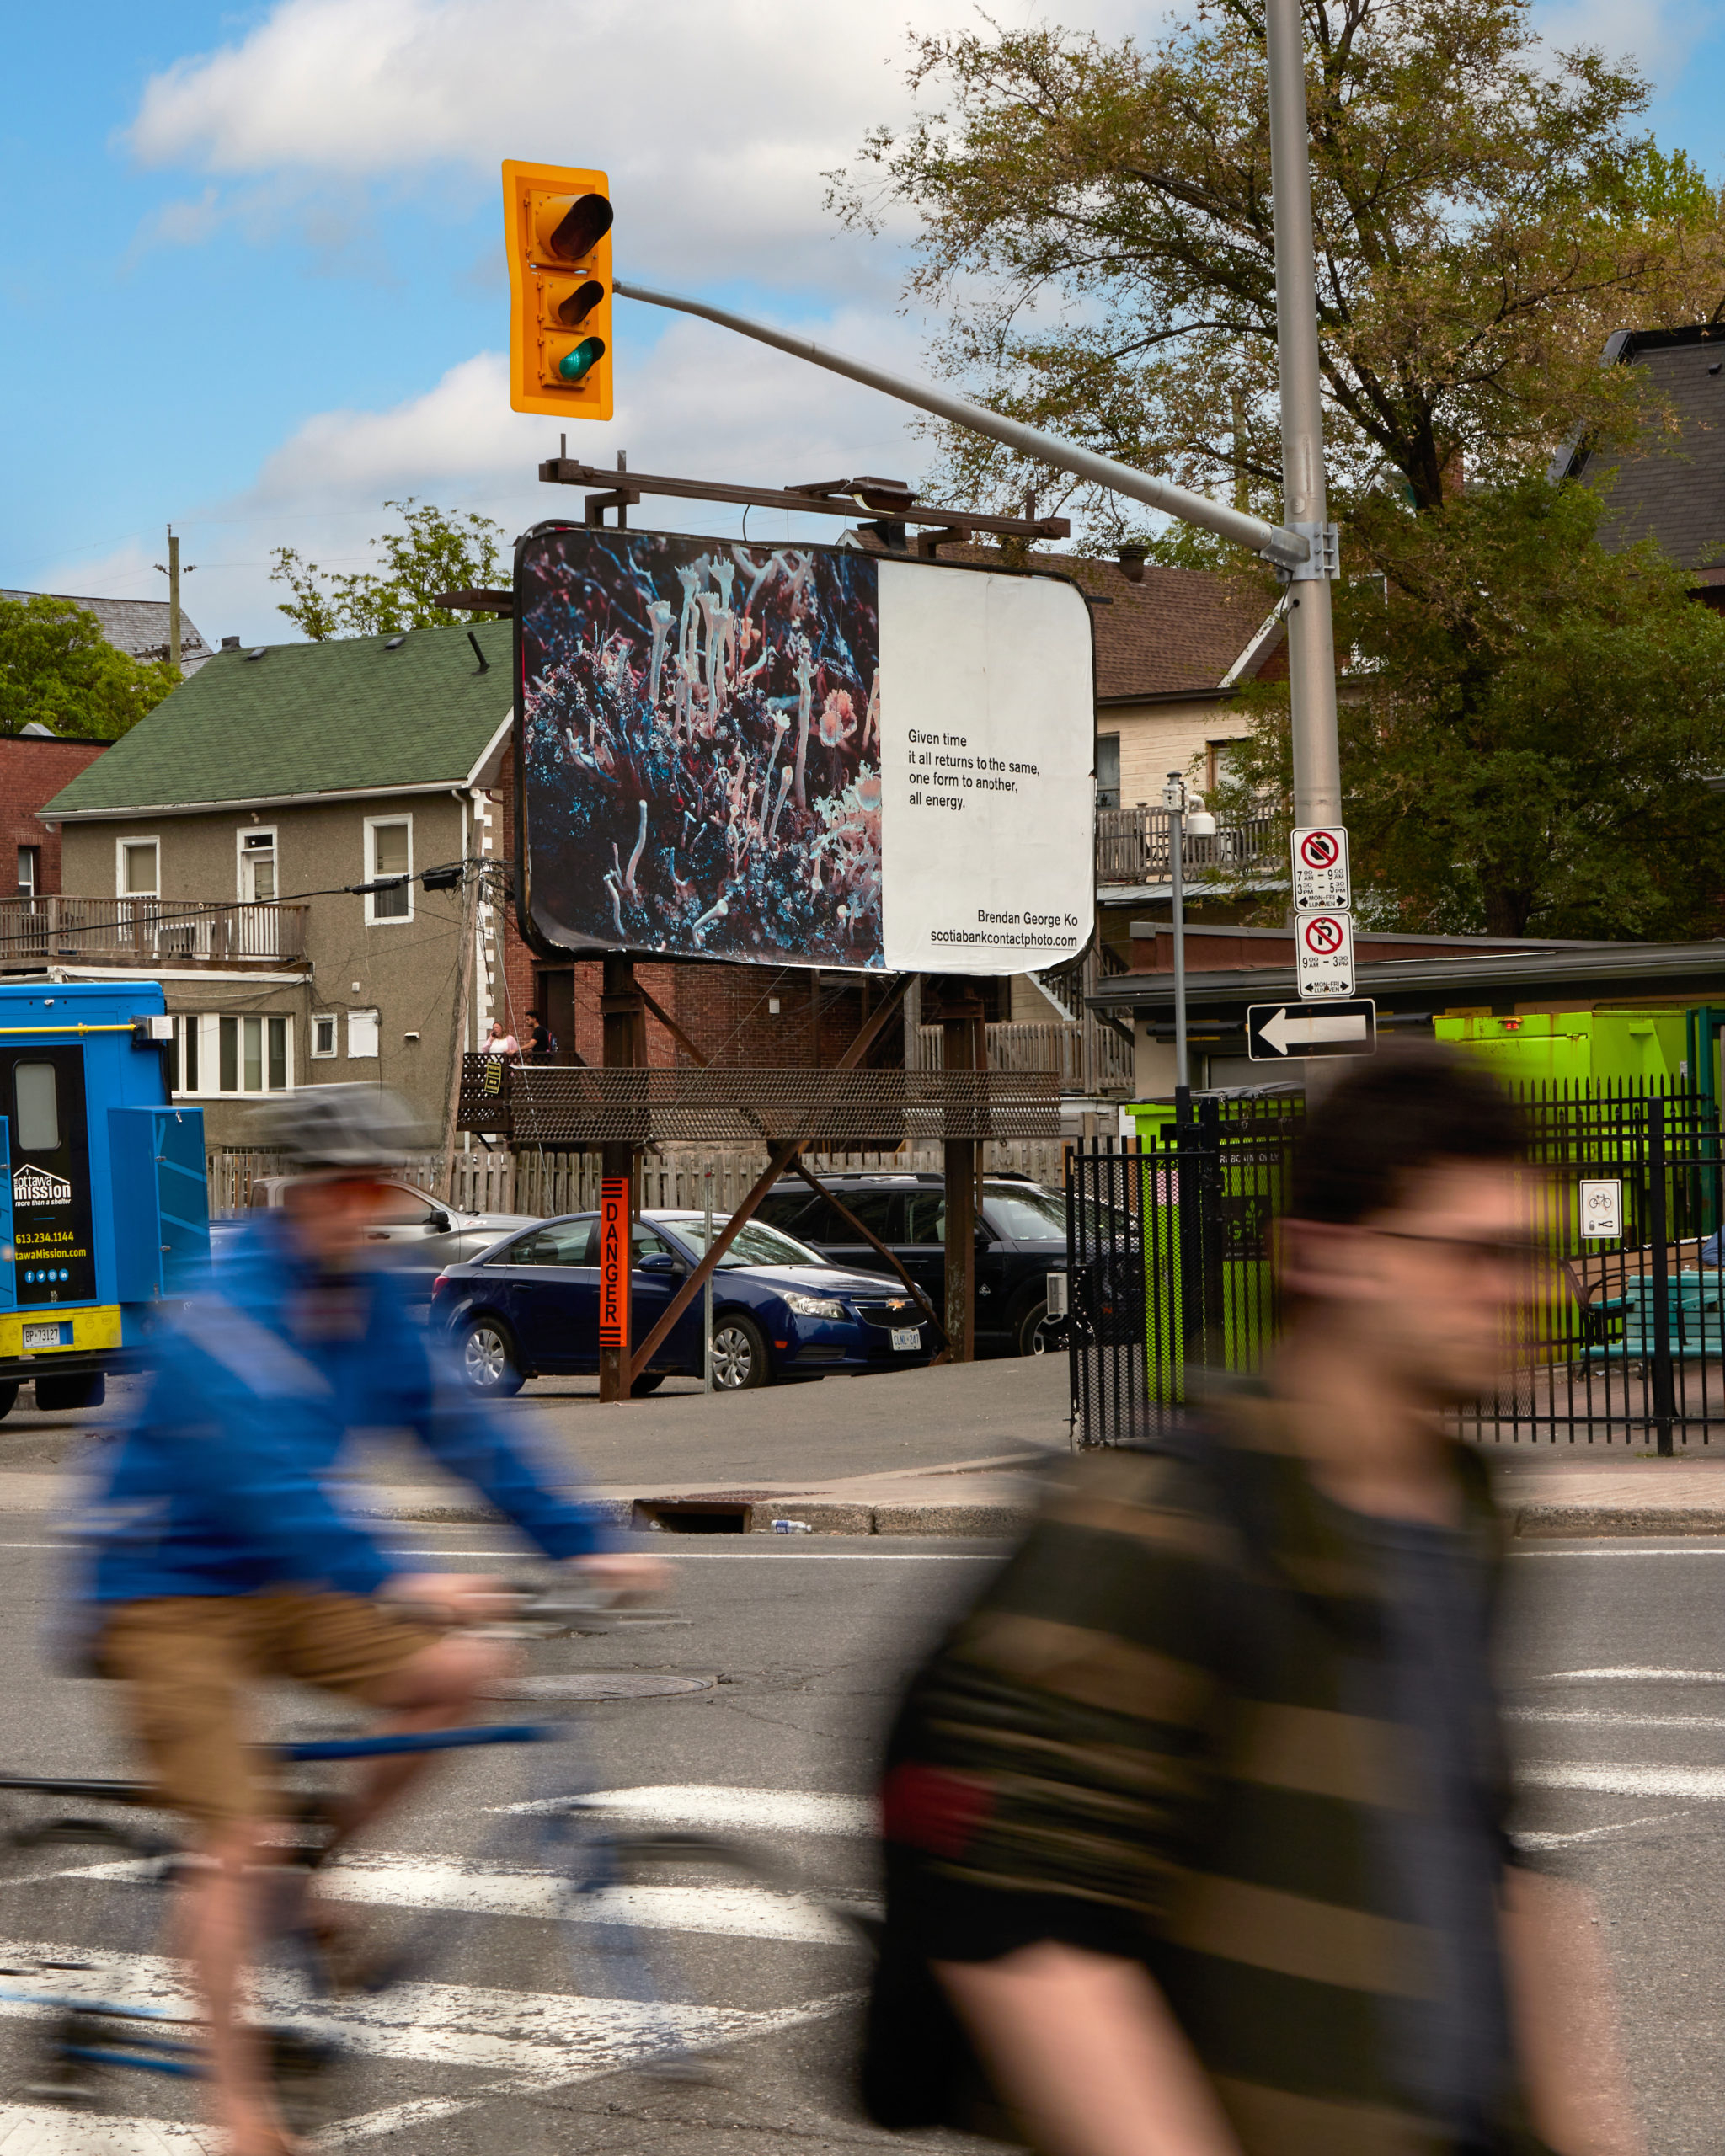     Brendan George Ko, The Forest is Wired for Wisdom, installation on billboards in Ottawa and 9 other Canadian cities, 2022. Courtesy of the artist and CONTACT. Photo: Kaya Comeau

